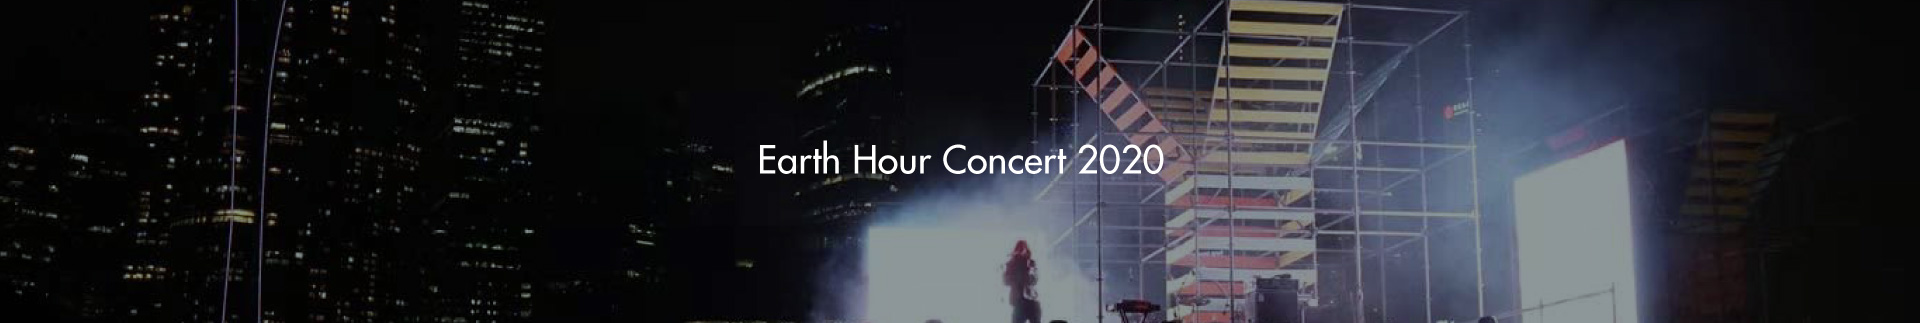 Earth Hour Concert 2020